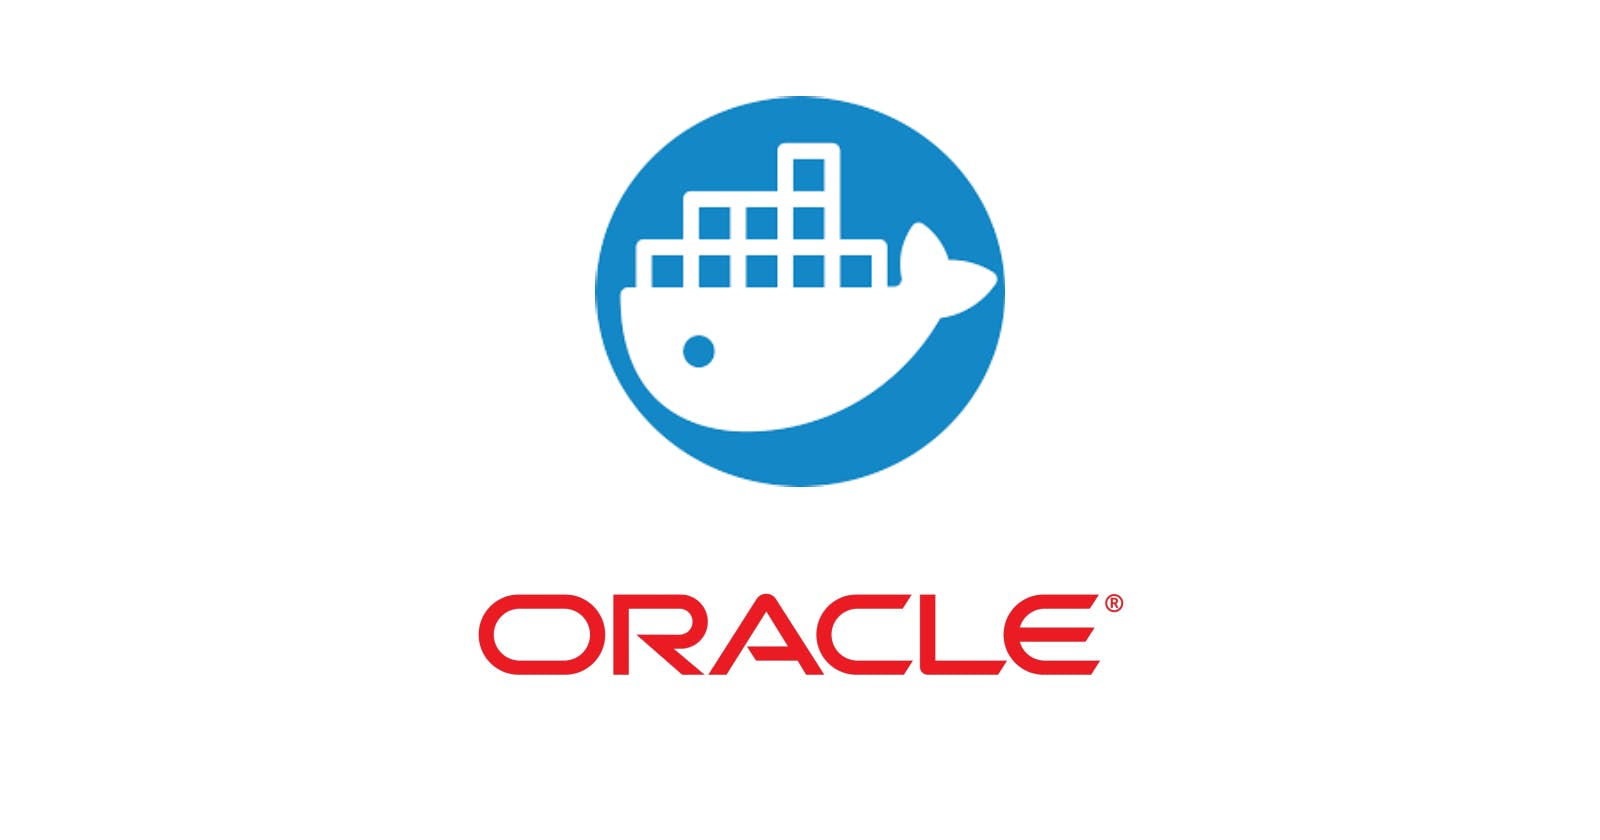 How to Run an Oracle Database Container